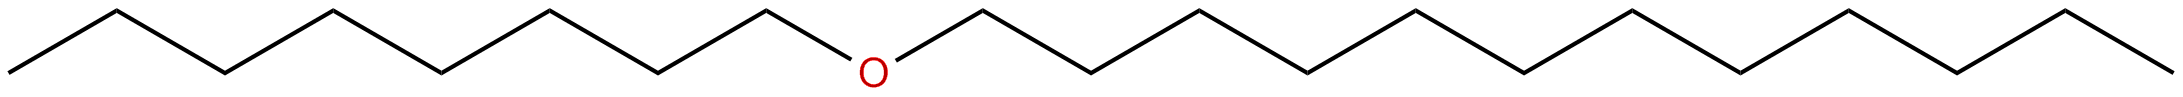 Image of dodecyl octyl ether